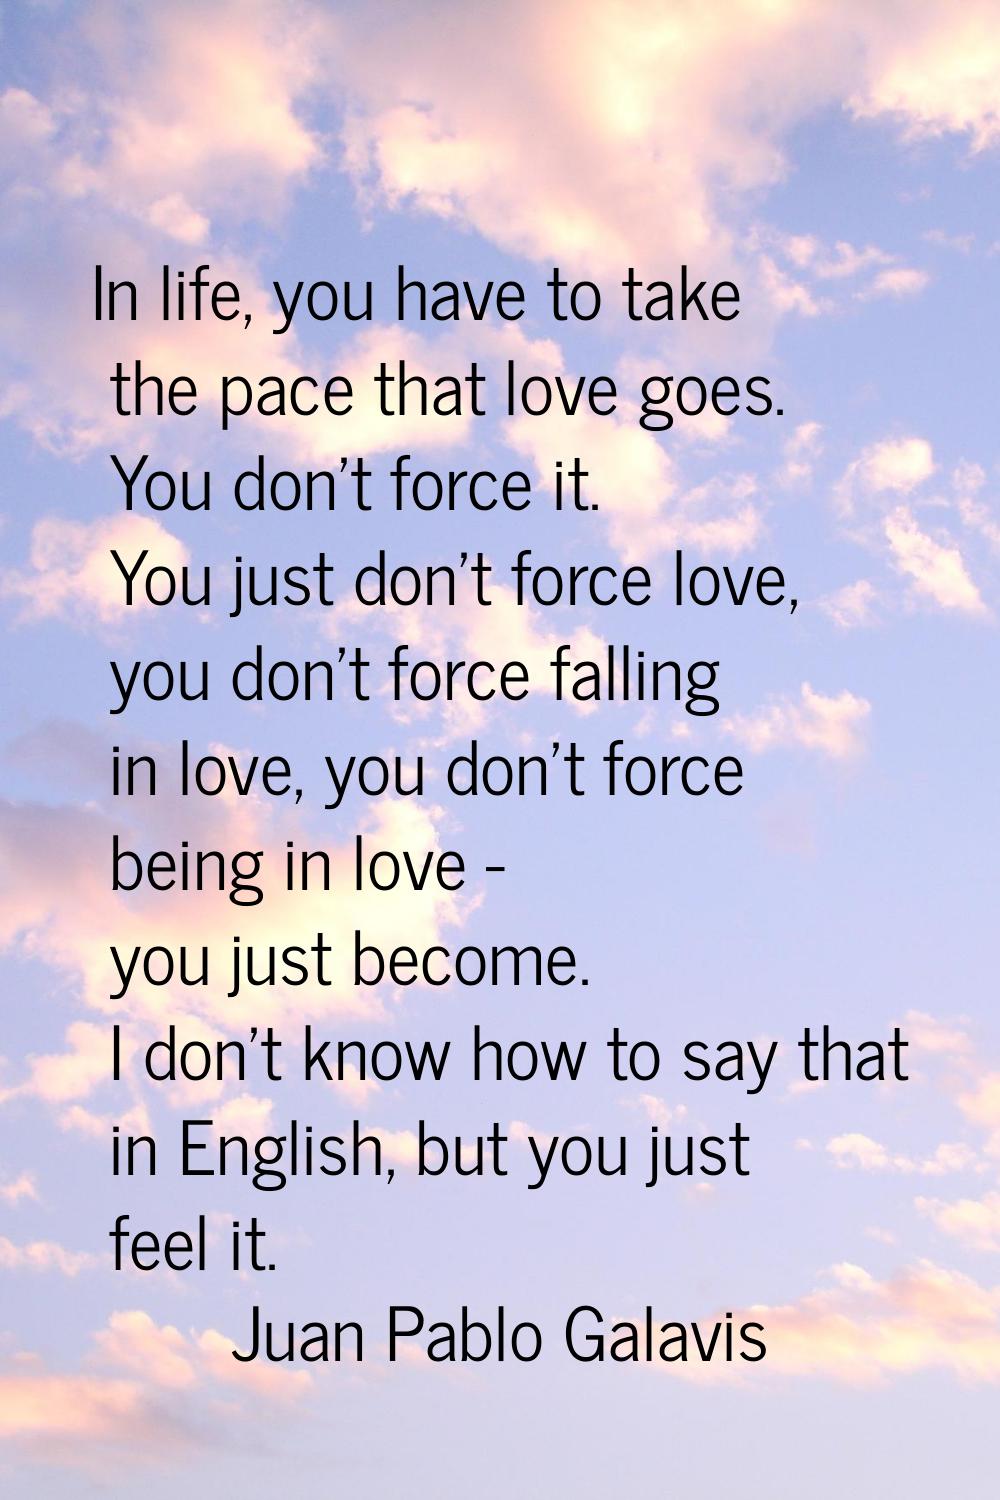 In life, you have to take the pace that love goes. You don't force it. You just don't force love, y